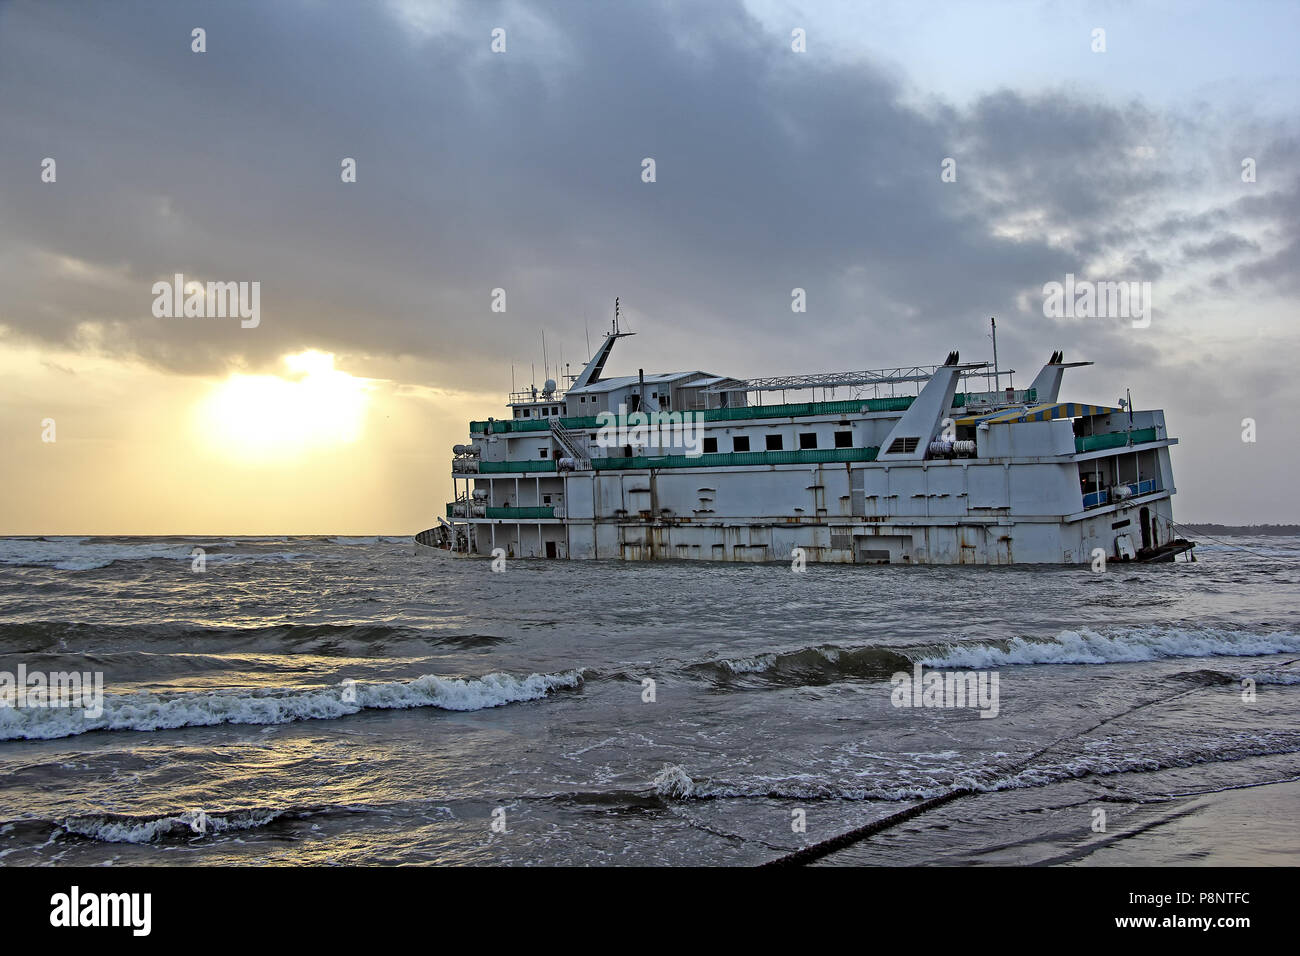 Marine vessel, to be used as offshore casino, run aground off Miramer coast in Goa, India, waiting to be salvaged. Stock Photo